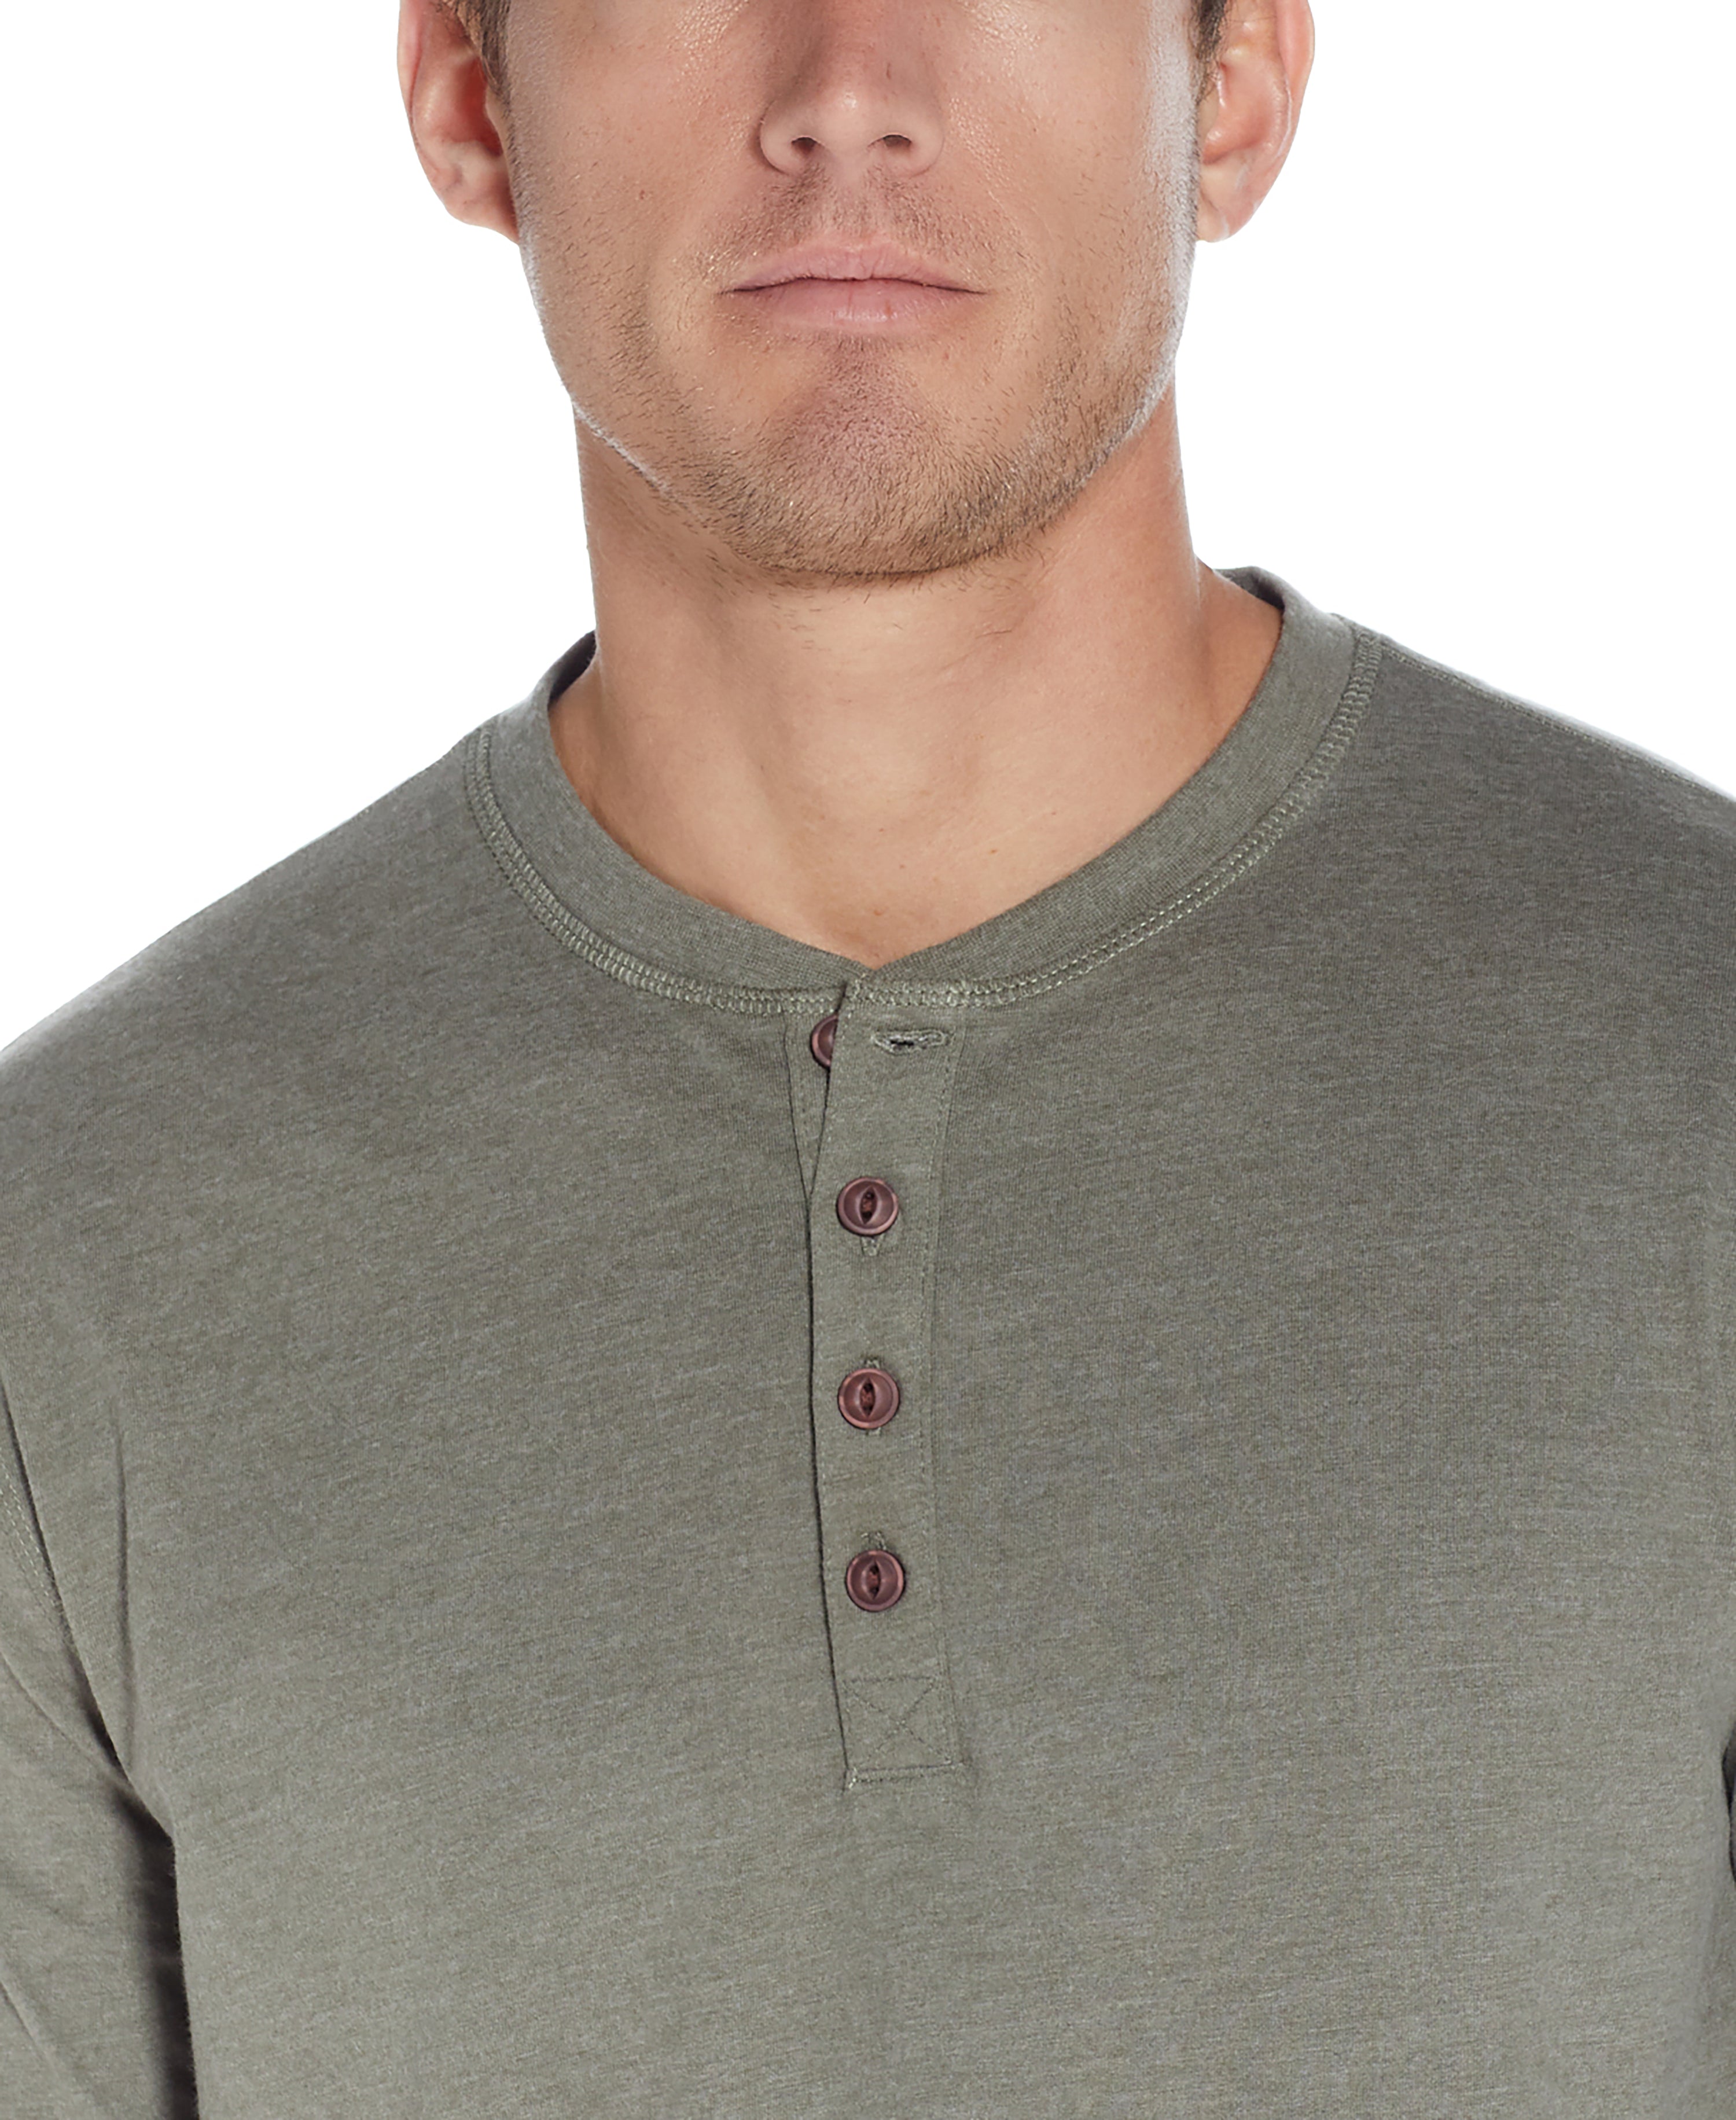 LONG SLEEVE HENLEY IN OLIVE